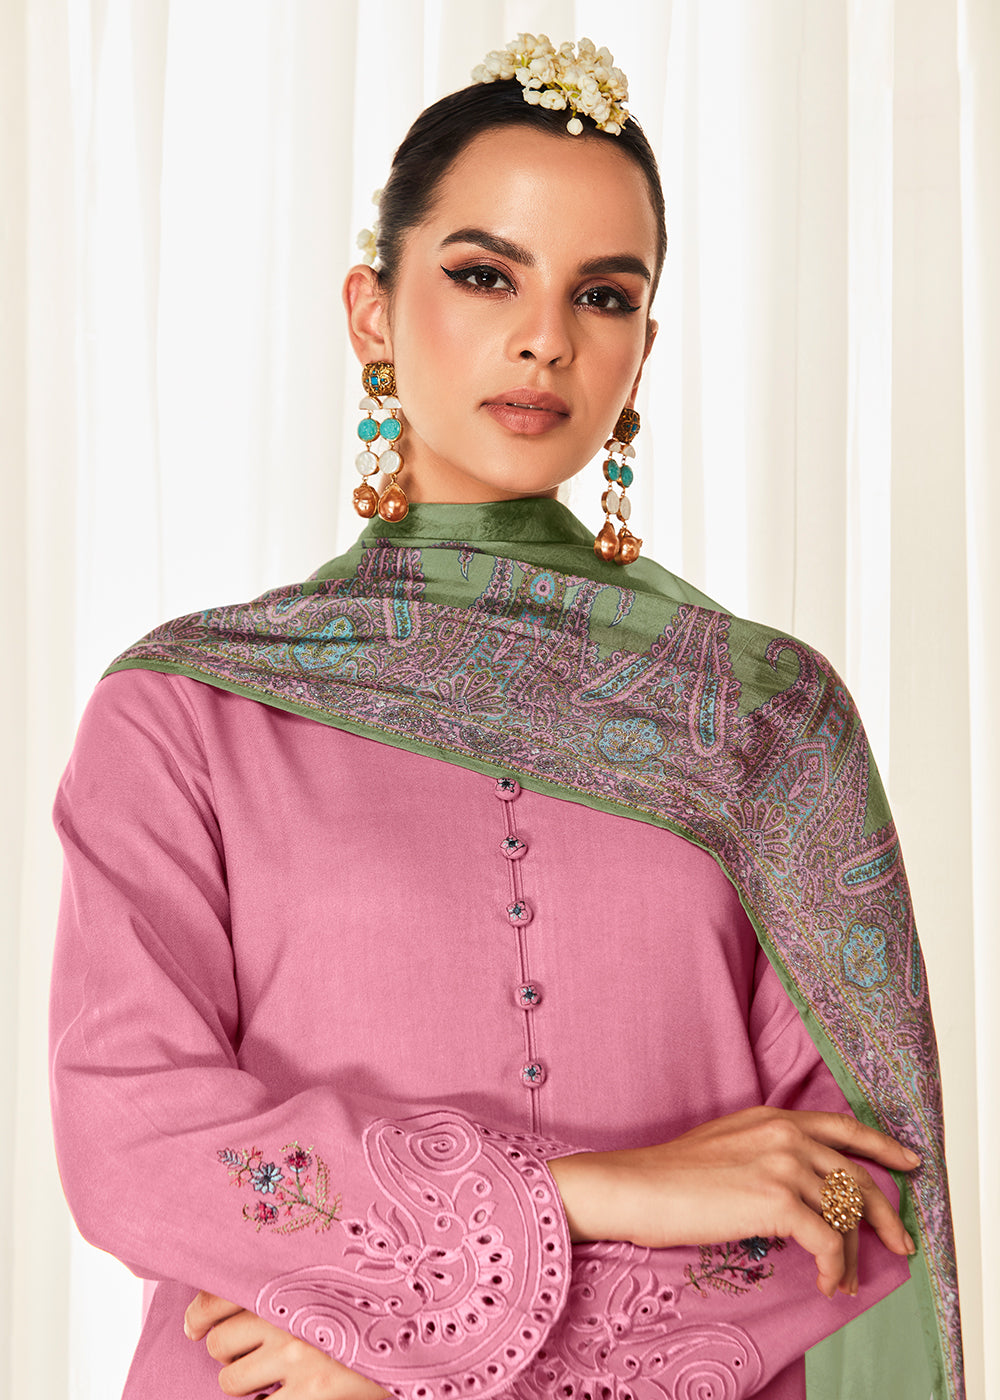 Buy Now Pleasing Pink Suzani Inspired Embroidered Ethnic Salwar Suit Online in USA, UK, Canada, Germany, Australia & Worldwide at Empress Clothing. 